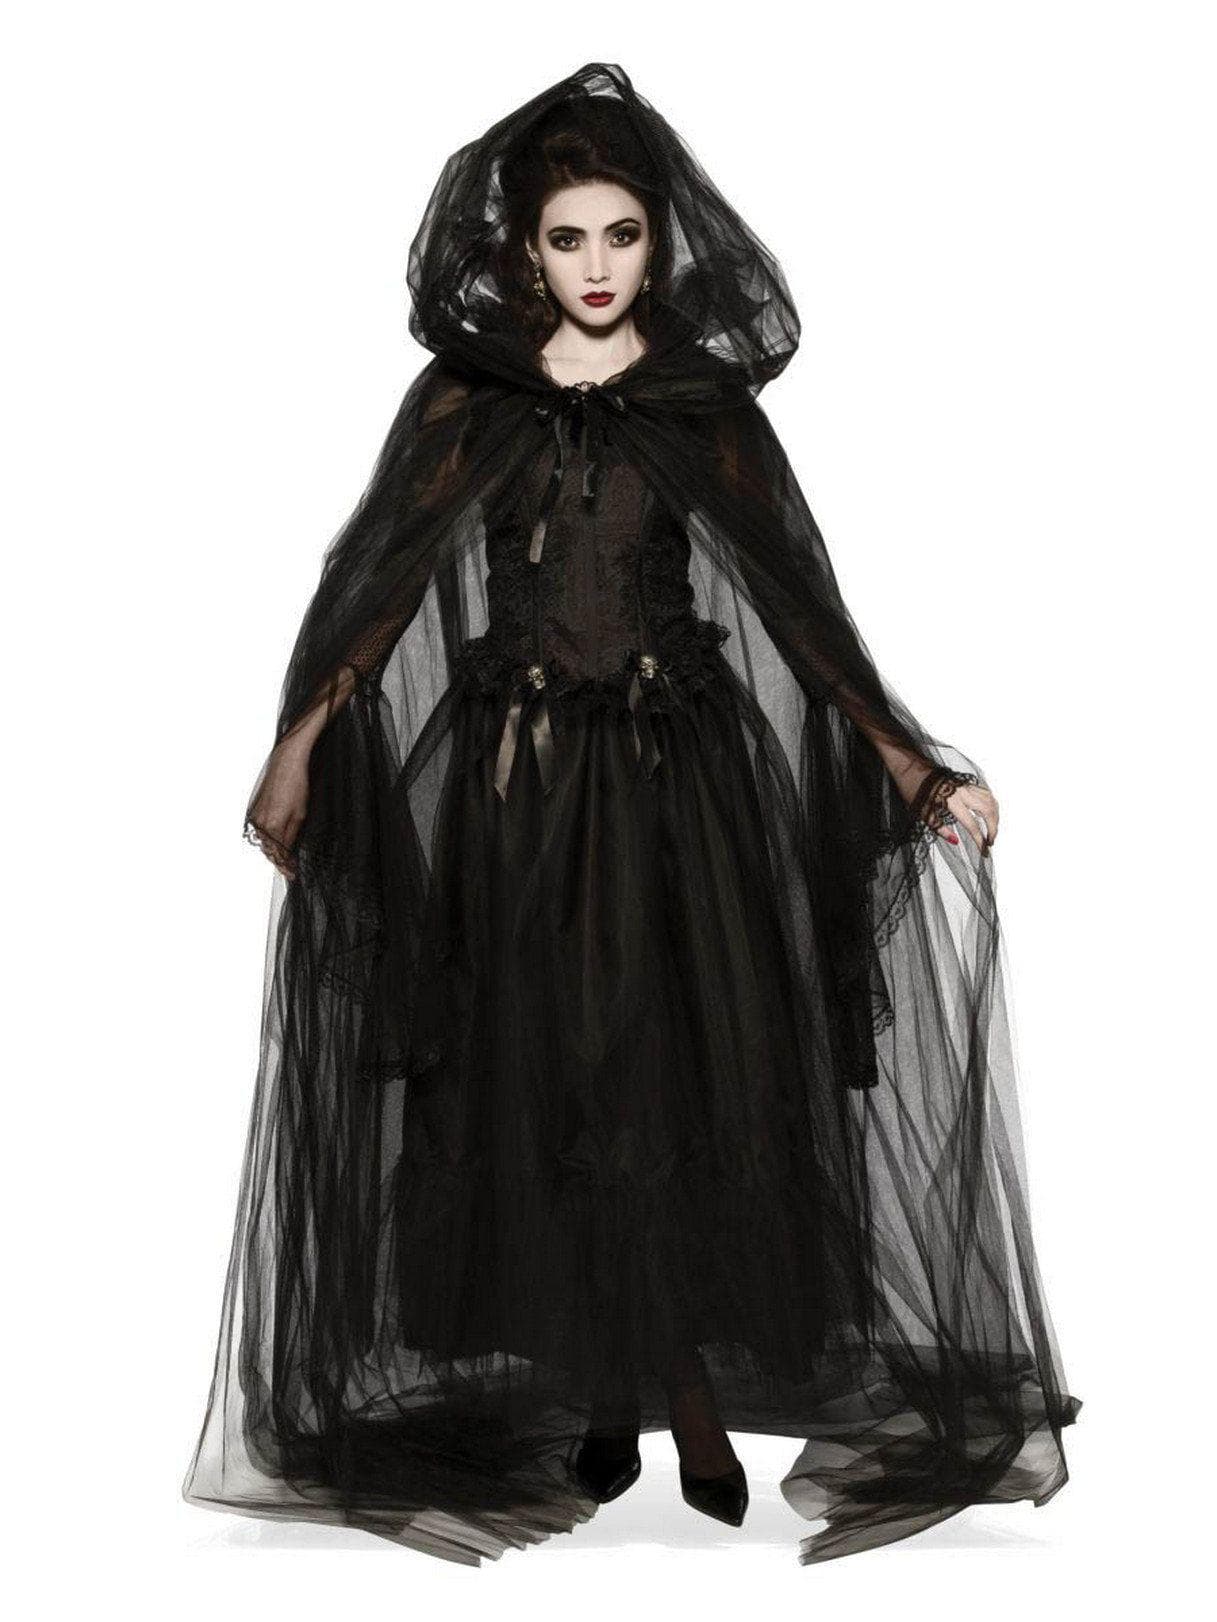 Adult Black Hooded Tulle Cape - costumes.com